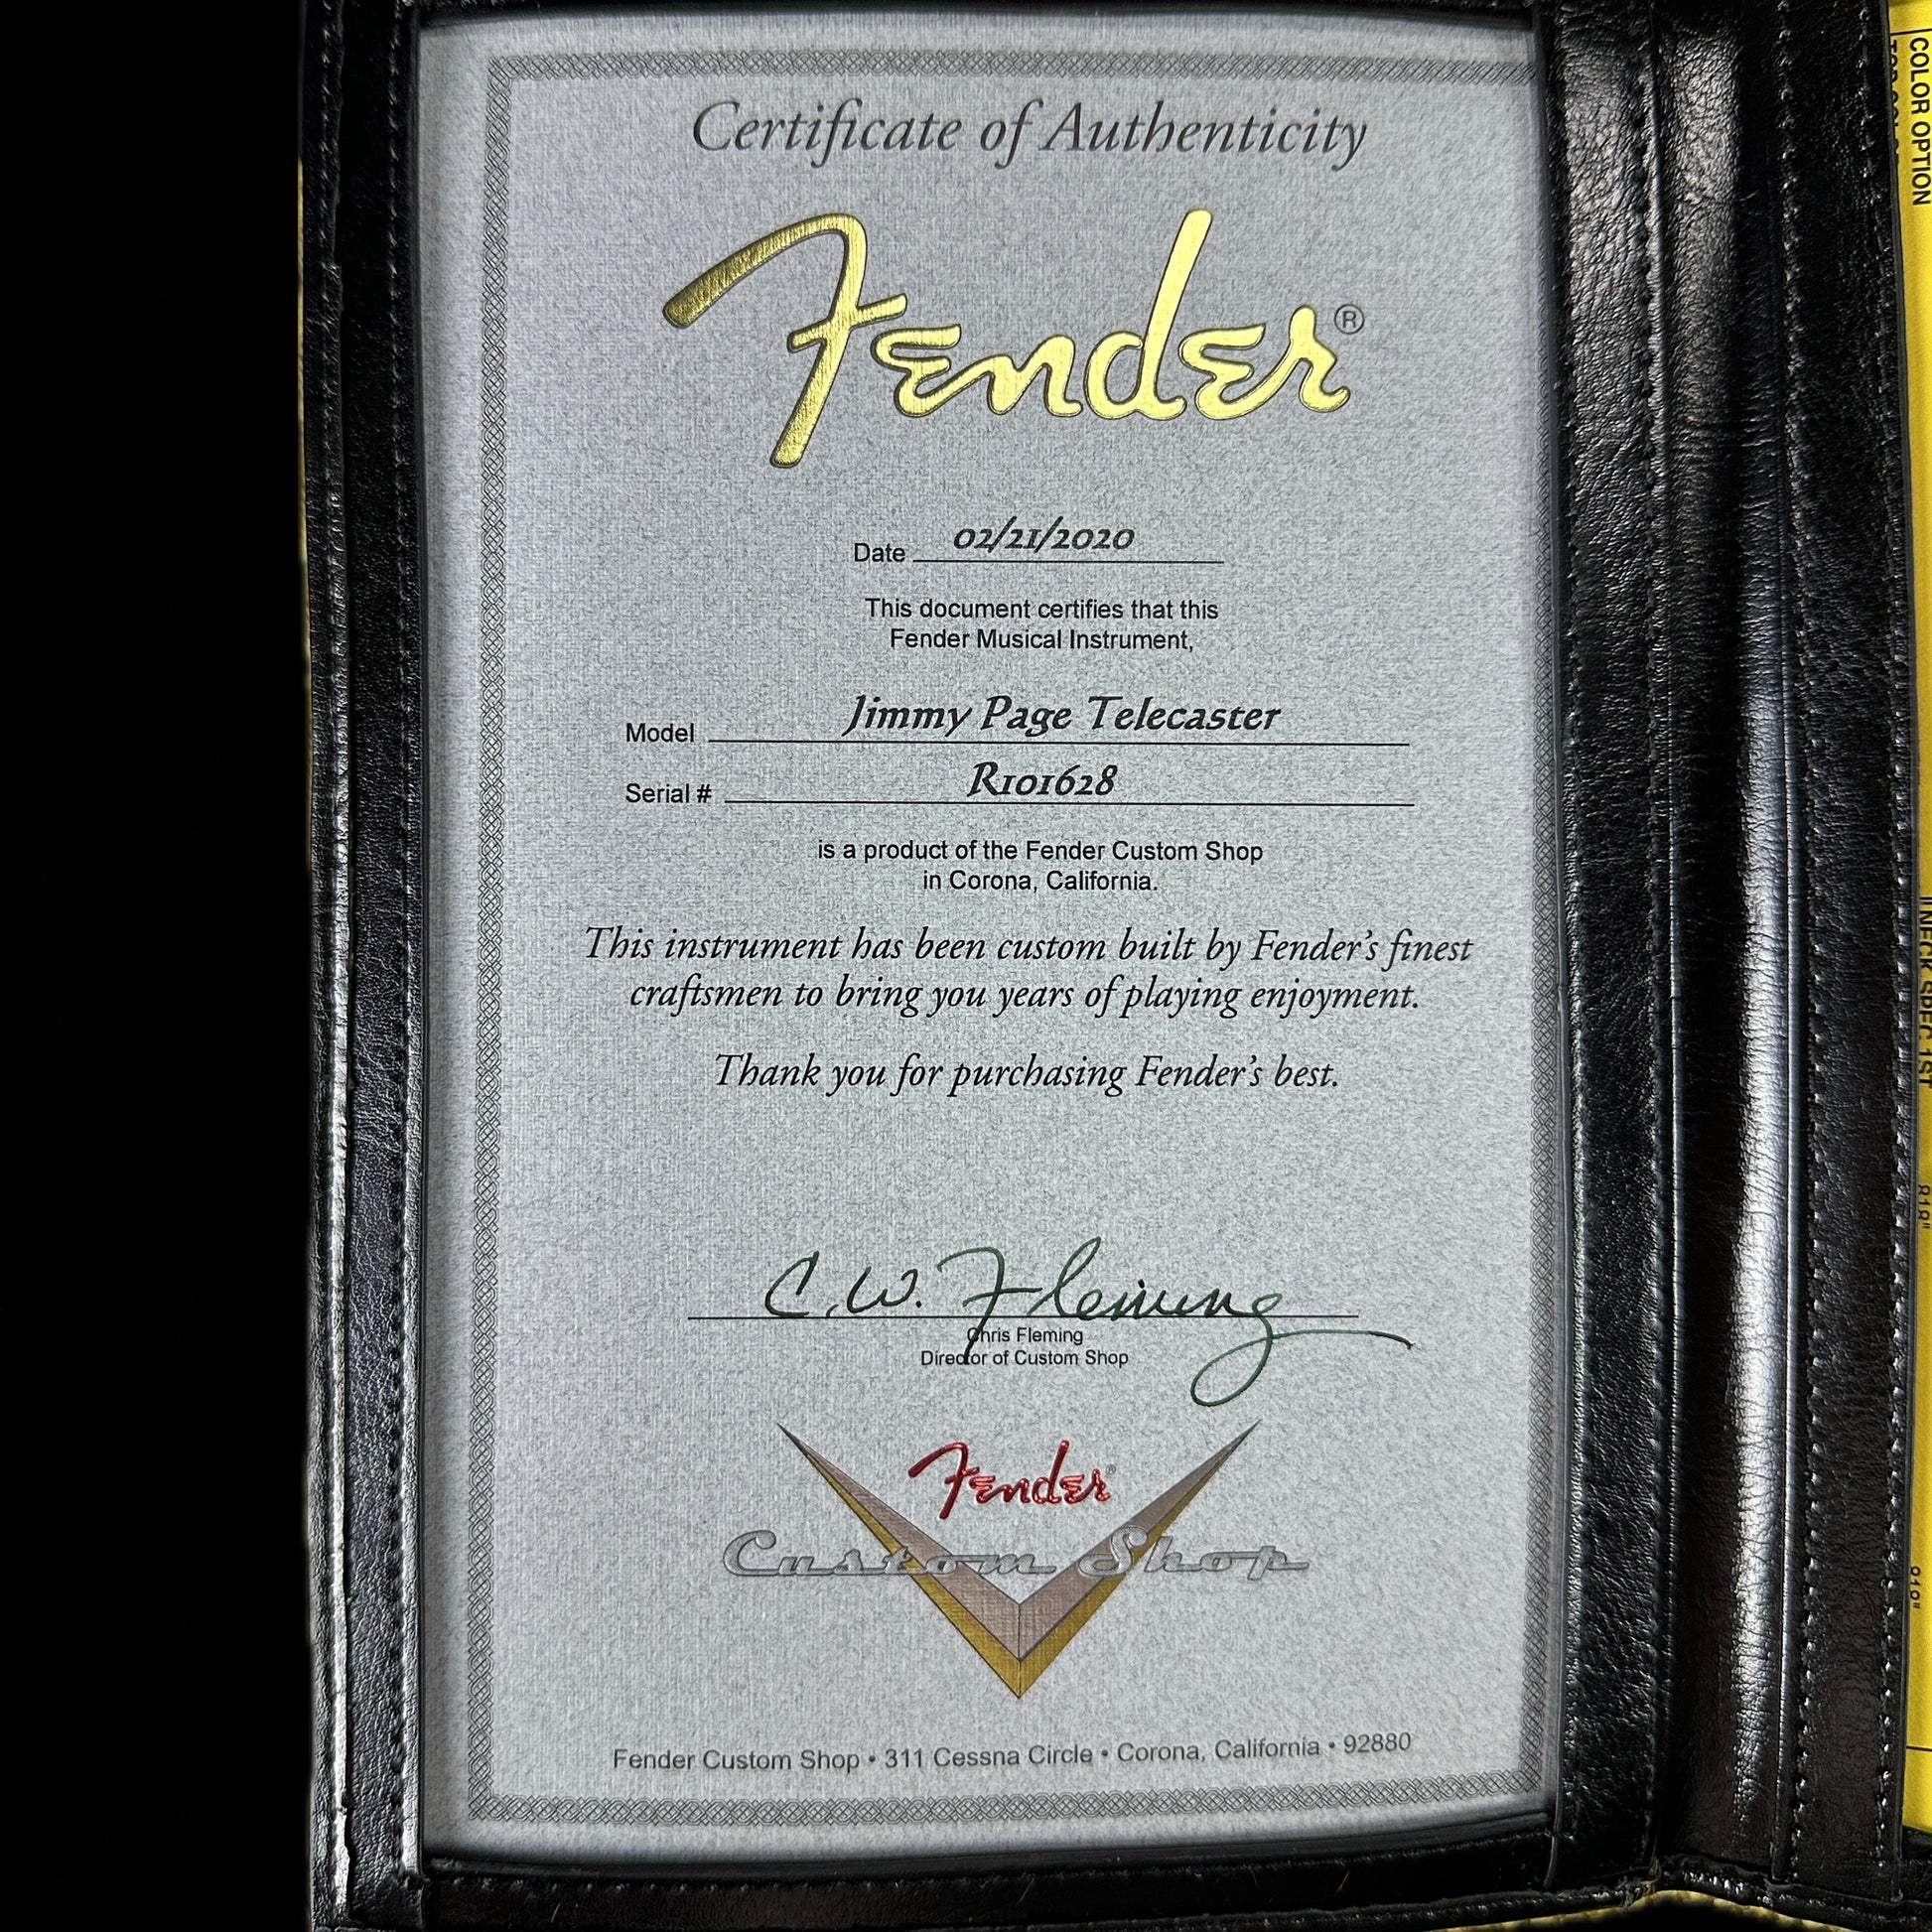 Certificate of authenticity for Used Fender Custom Shop Jimmy Page Telecaster.